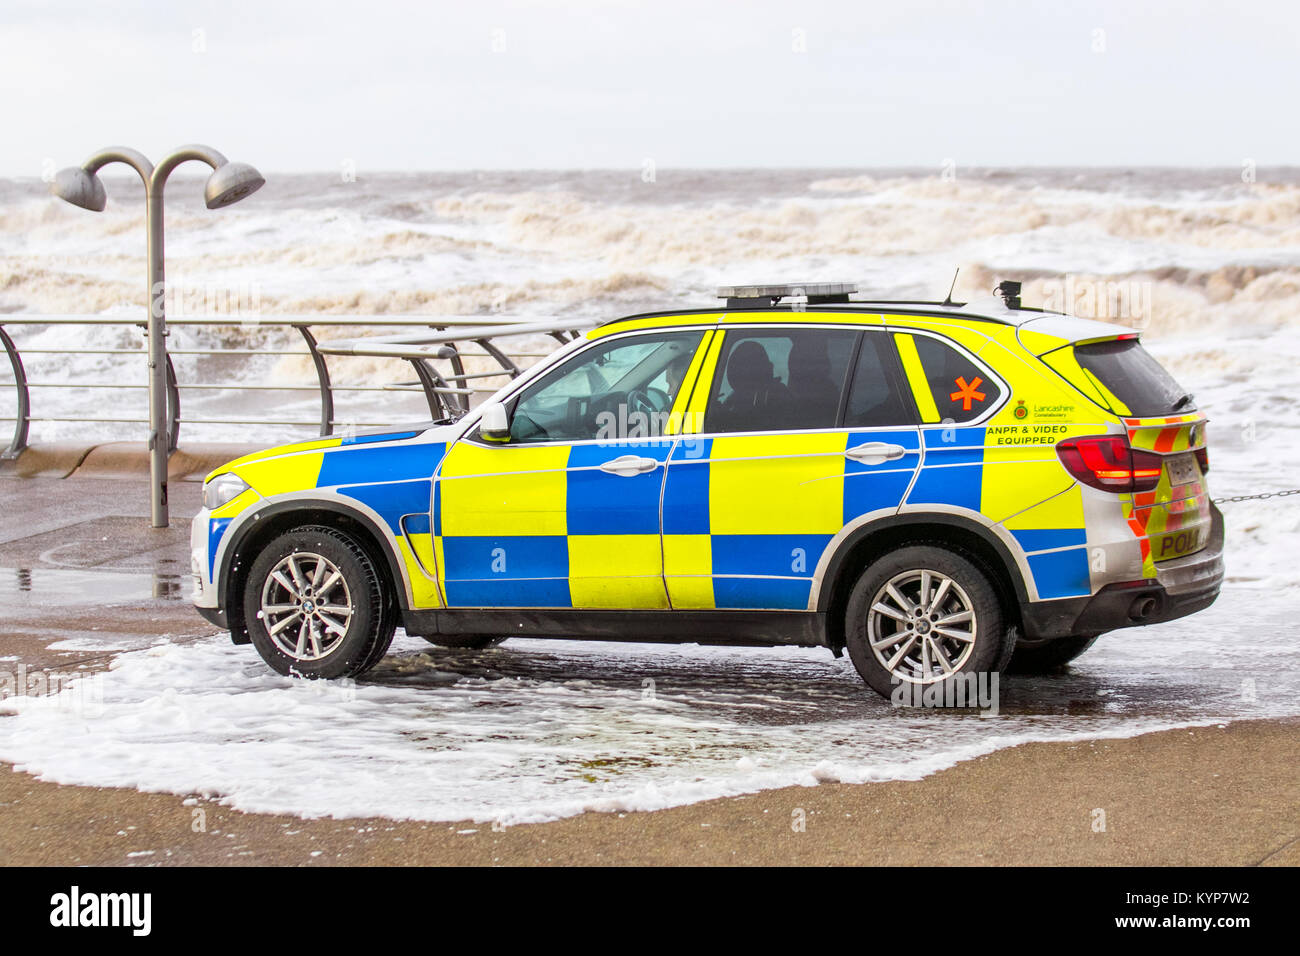 Blackpool Lancashire. 16th Jan 2018. UK Weather. Gale Force Winds in Blackpool. An amber 'be prepared' warning, which includes winds gusting up to 50mph in some areas, has been issued for the northwest coasts of England. Armed response vehicle (ARV) is a type of BMW police car operated by British law enforcement, policing vehicle, armed, protection, weapon, man, people, security, gun, car, street, force, officers.  ARVs Police cars are crewed by Authorised Firearms Officers to respond to incidents believed to involve firearms or other high-risk situations. Stock Photo